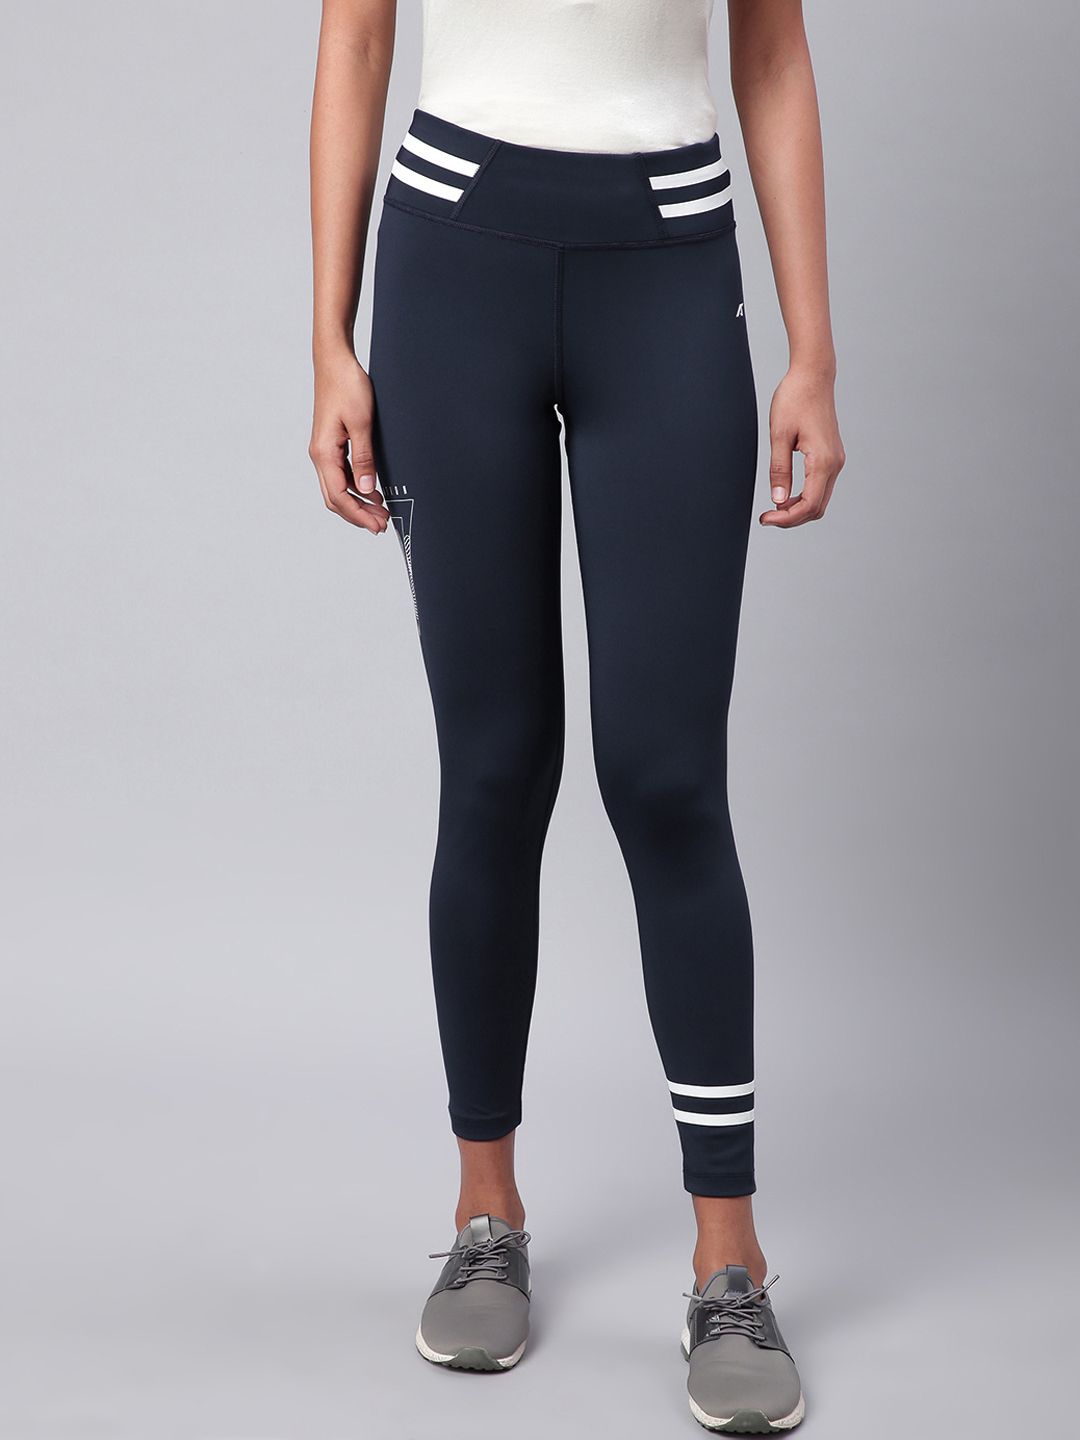 Alcis Women Navy Blue & White Rapid Dry Solid Cropped Training Tights Price in India